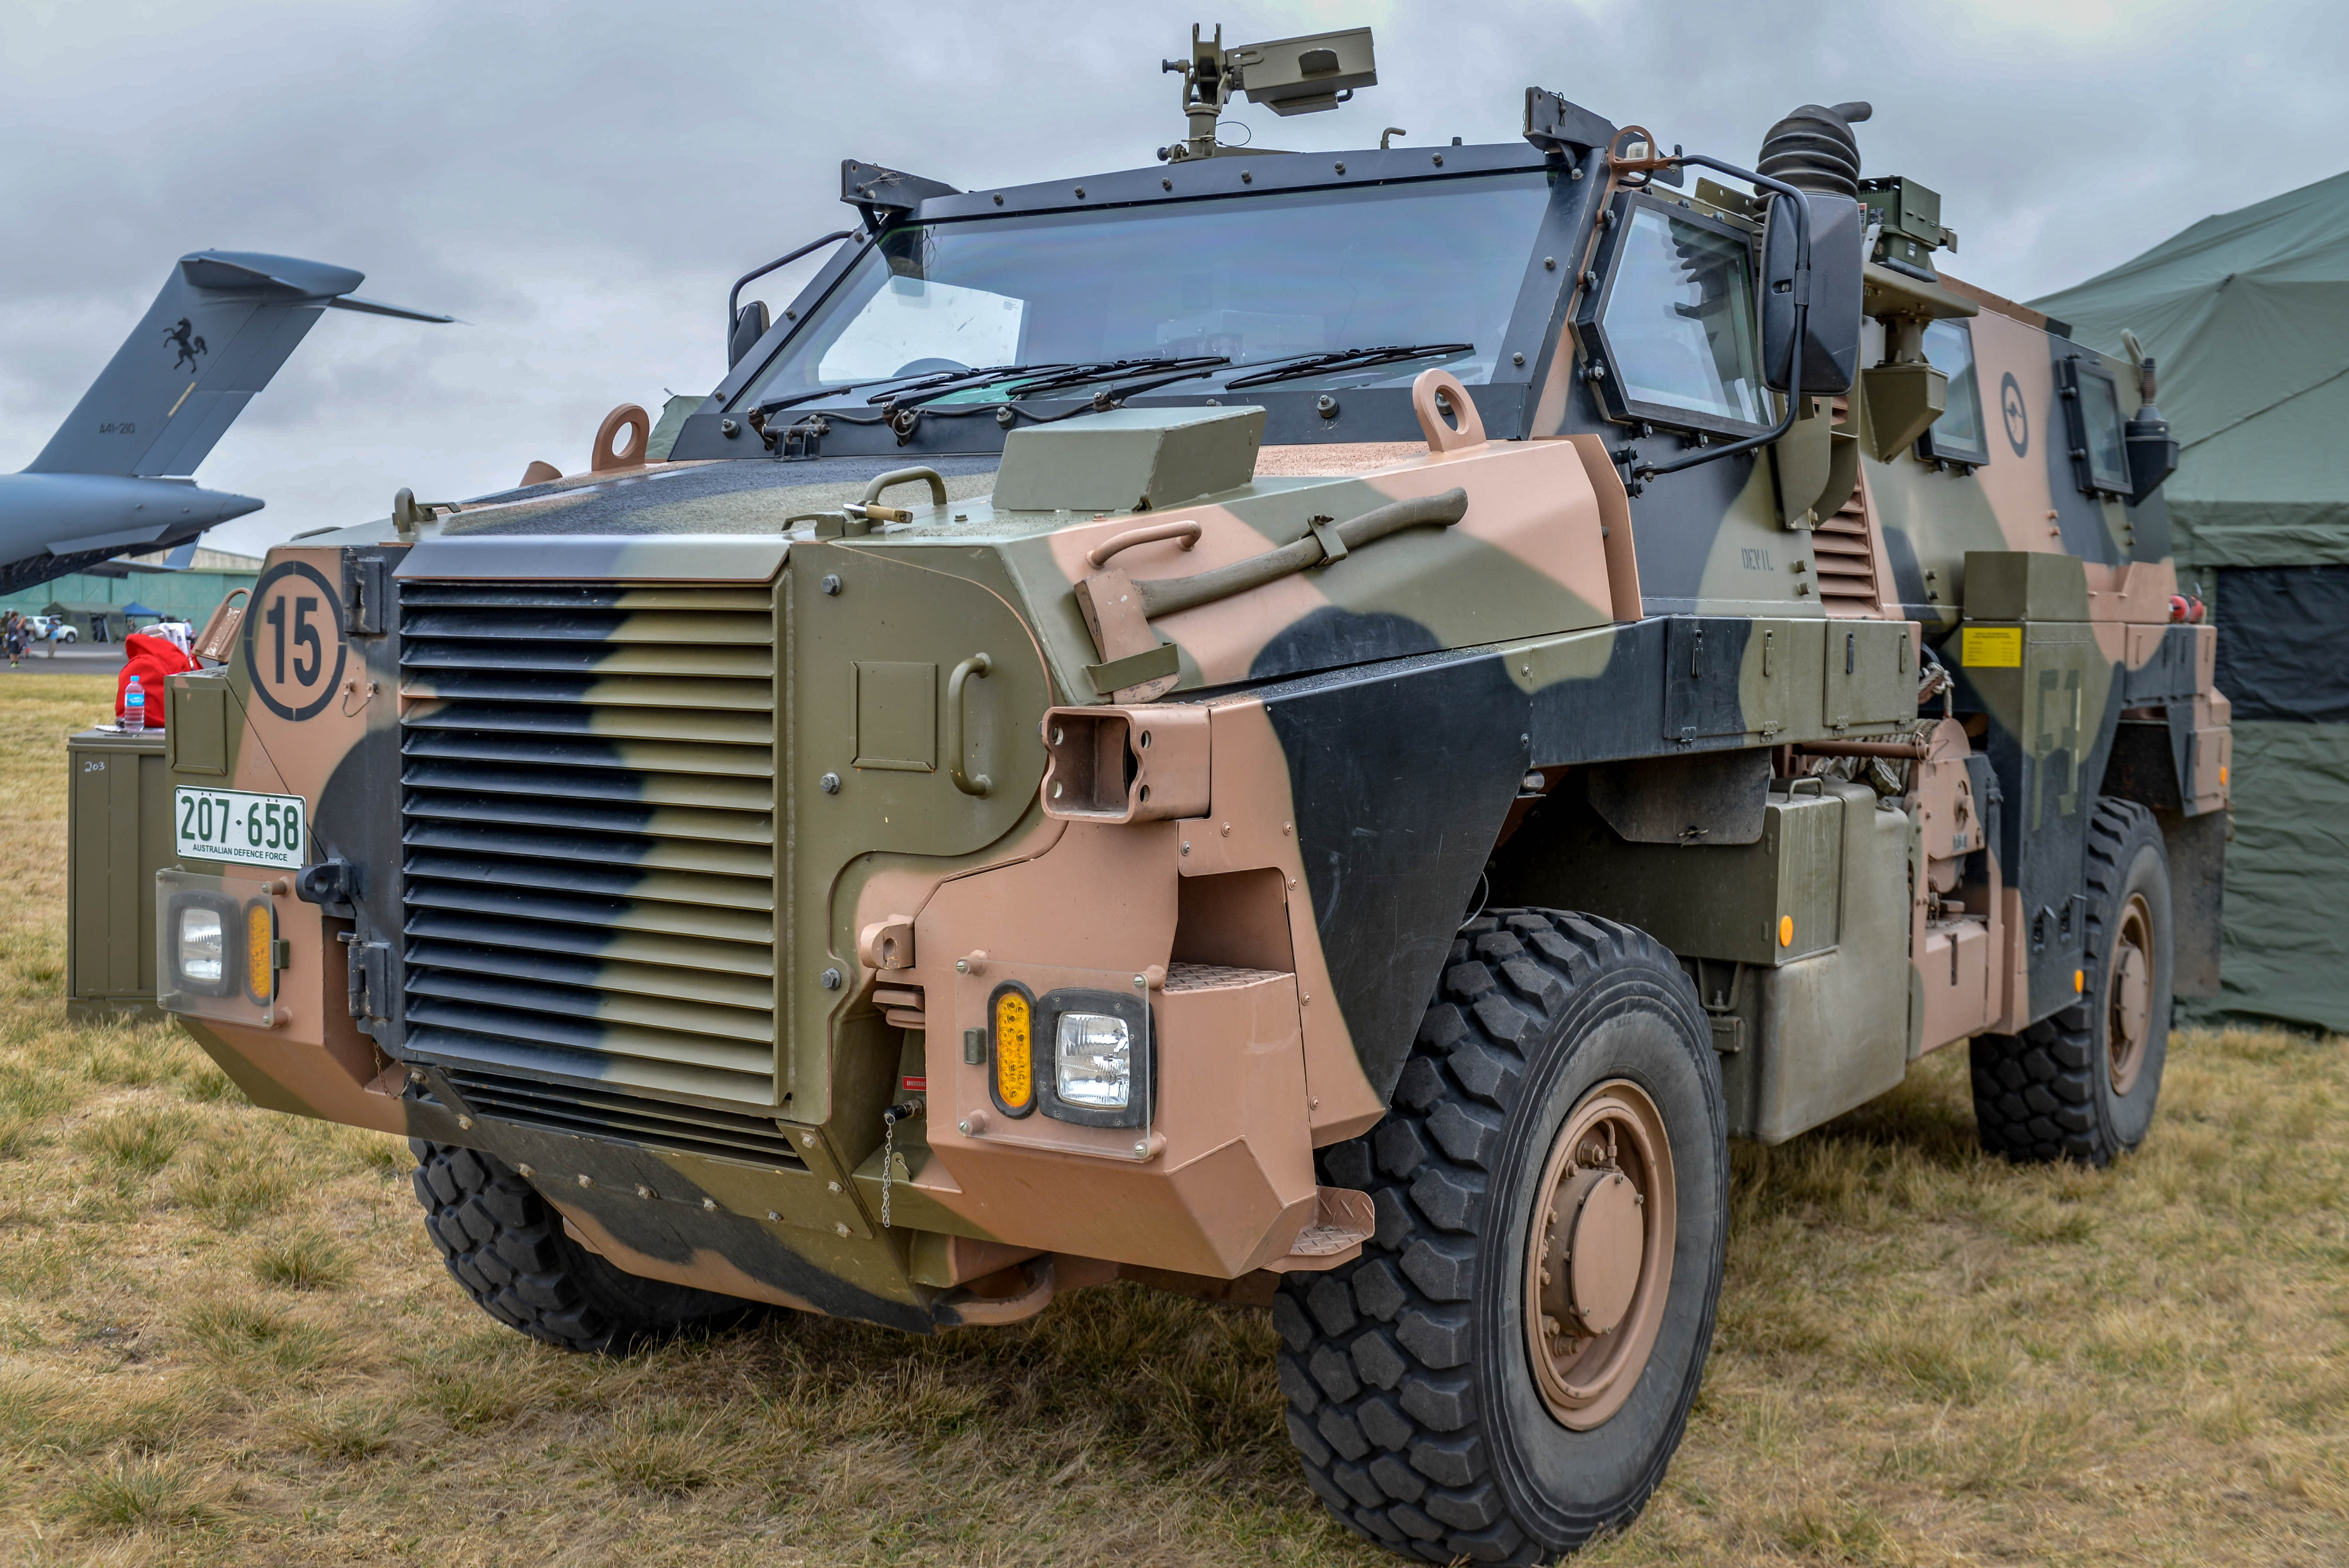 Bushmaster_Protected_Mobility_Vehicle_on_display_at_Centenary_of_Military_Aviation_2014.jpg